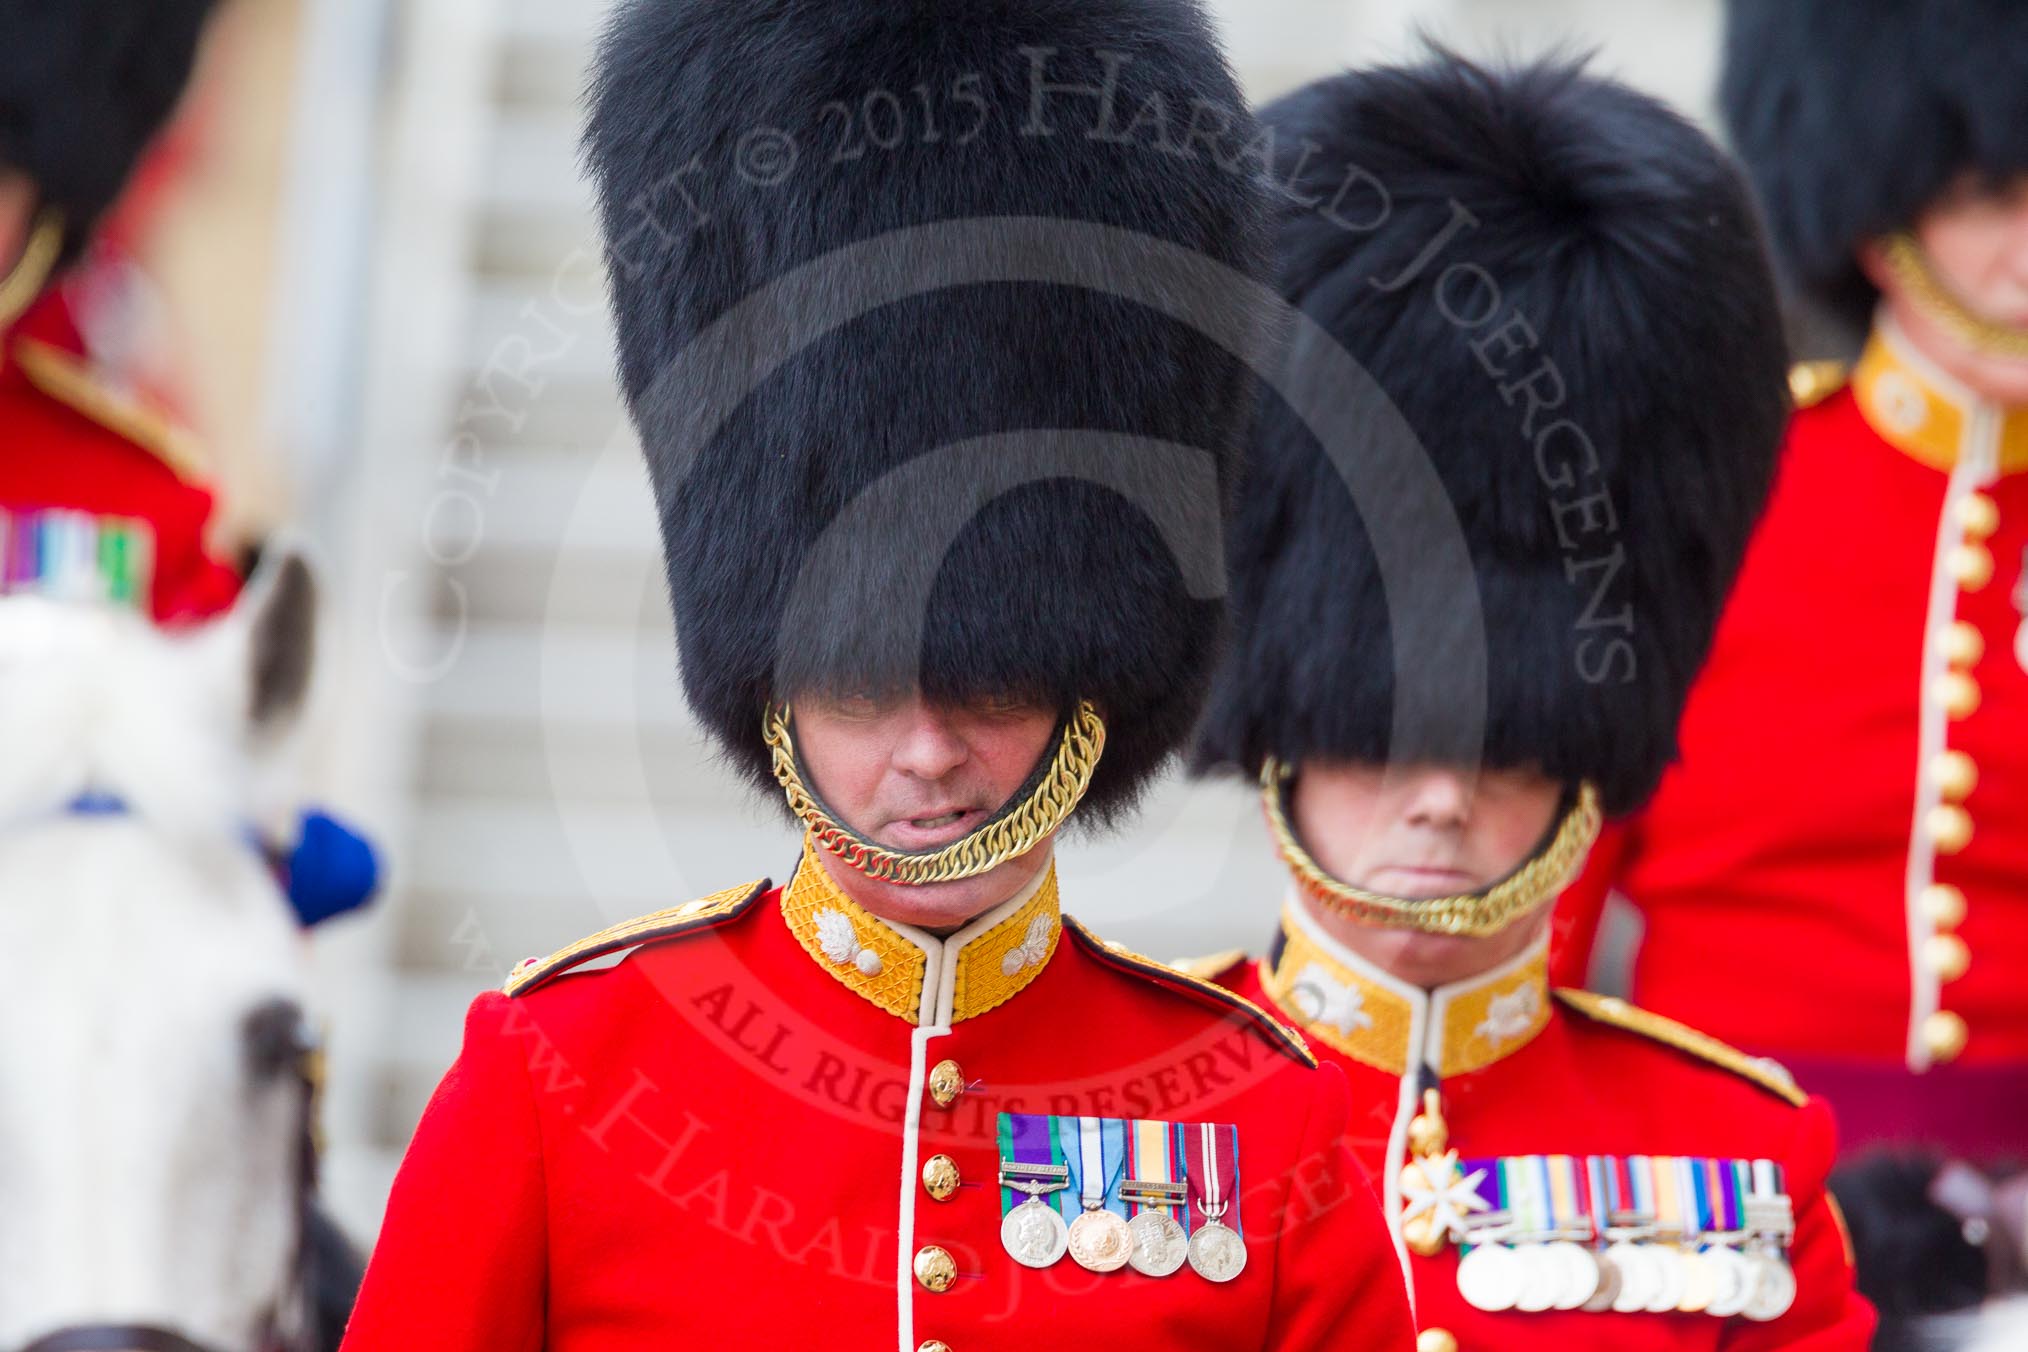 The Colonel's Review 2016.
Horse Guards Parade, Westminster,
London,

United Kingdom,
on 04 June 2016 at 11:01, image #189